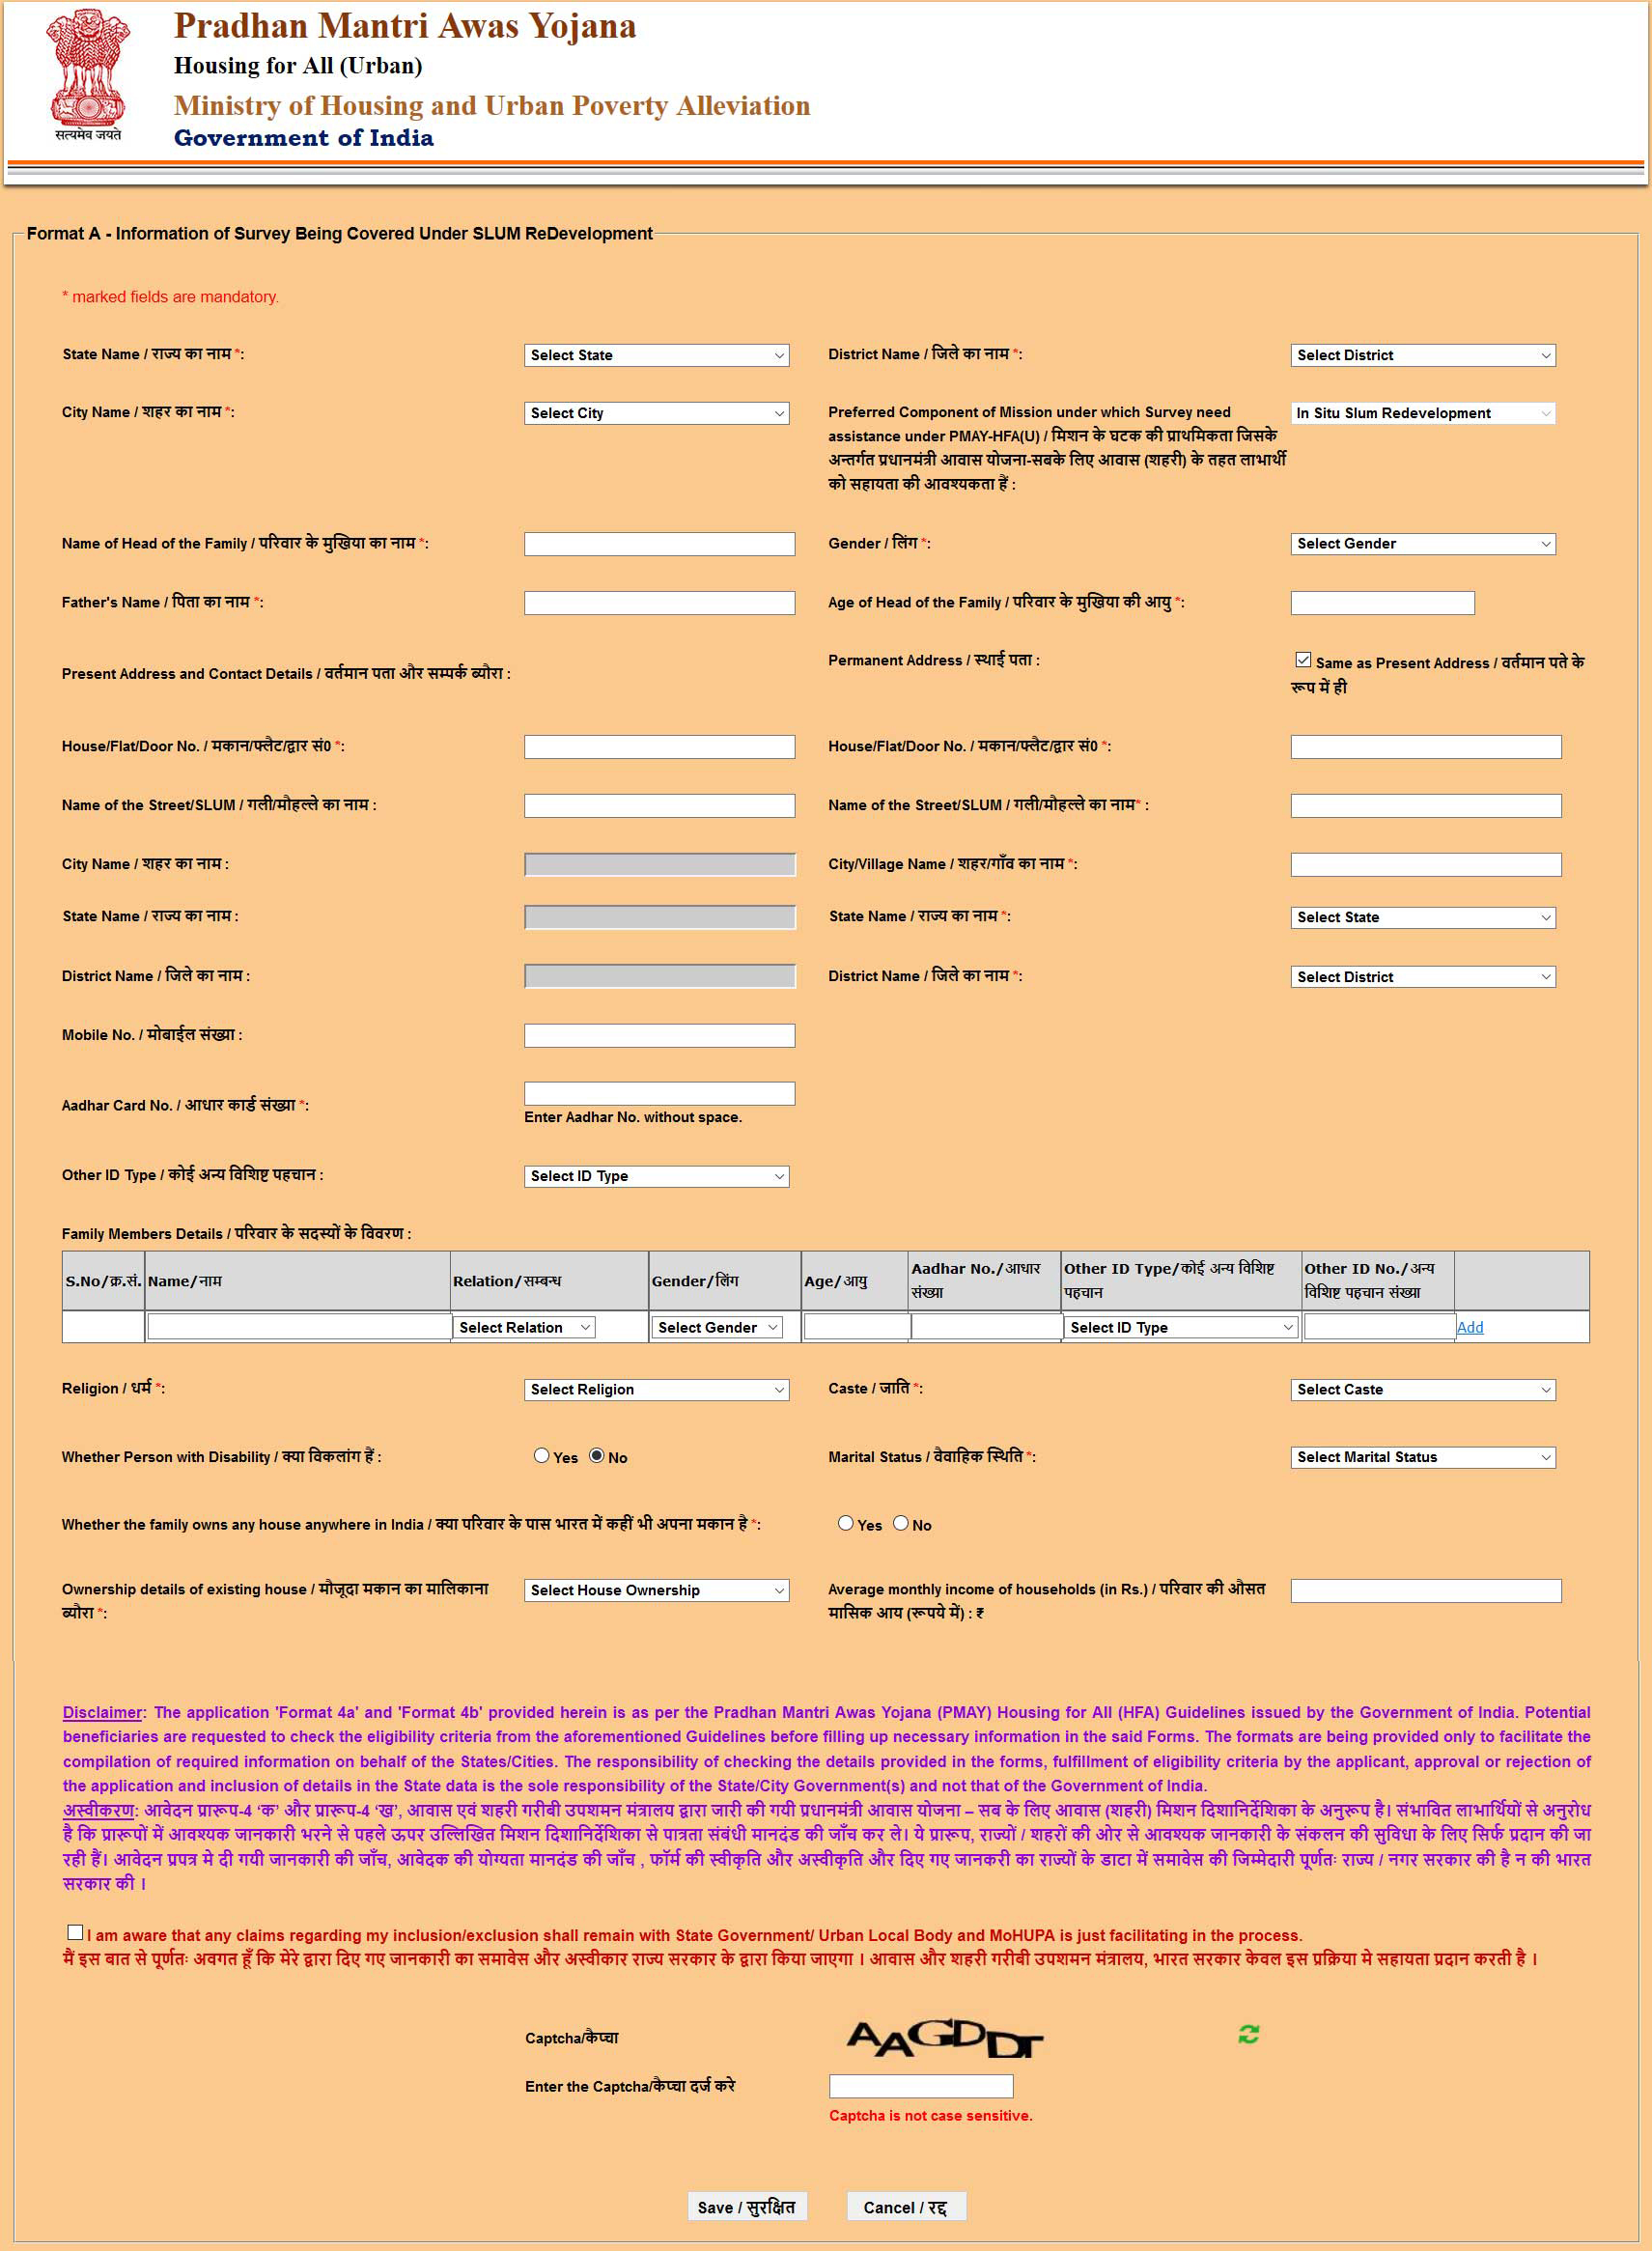 PMAY Online Application Form